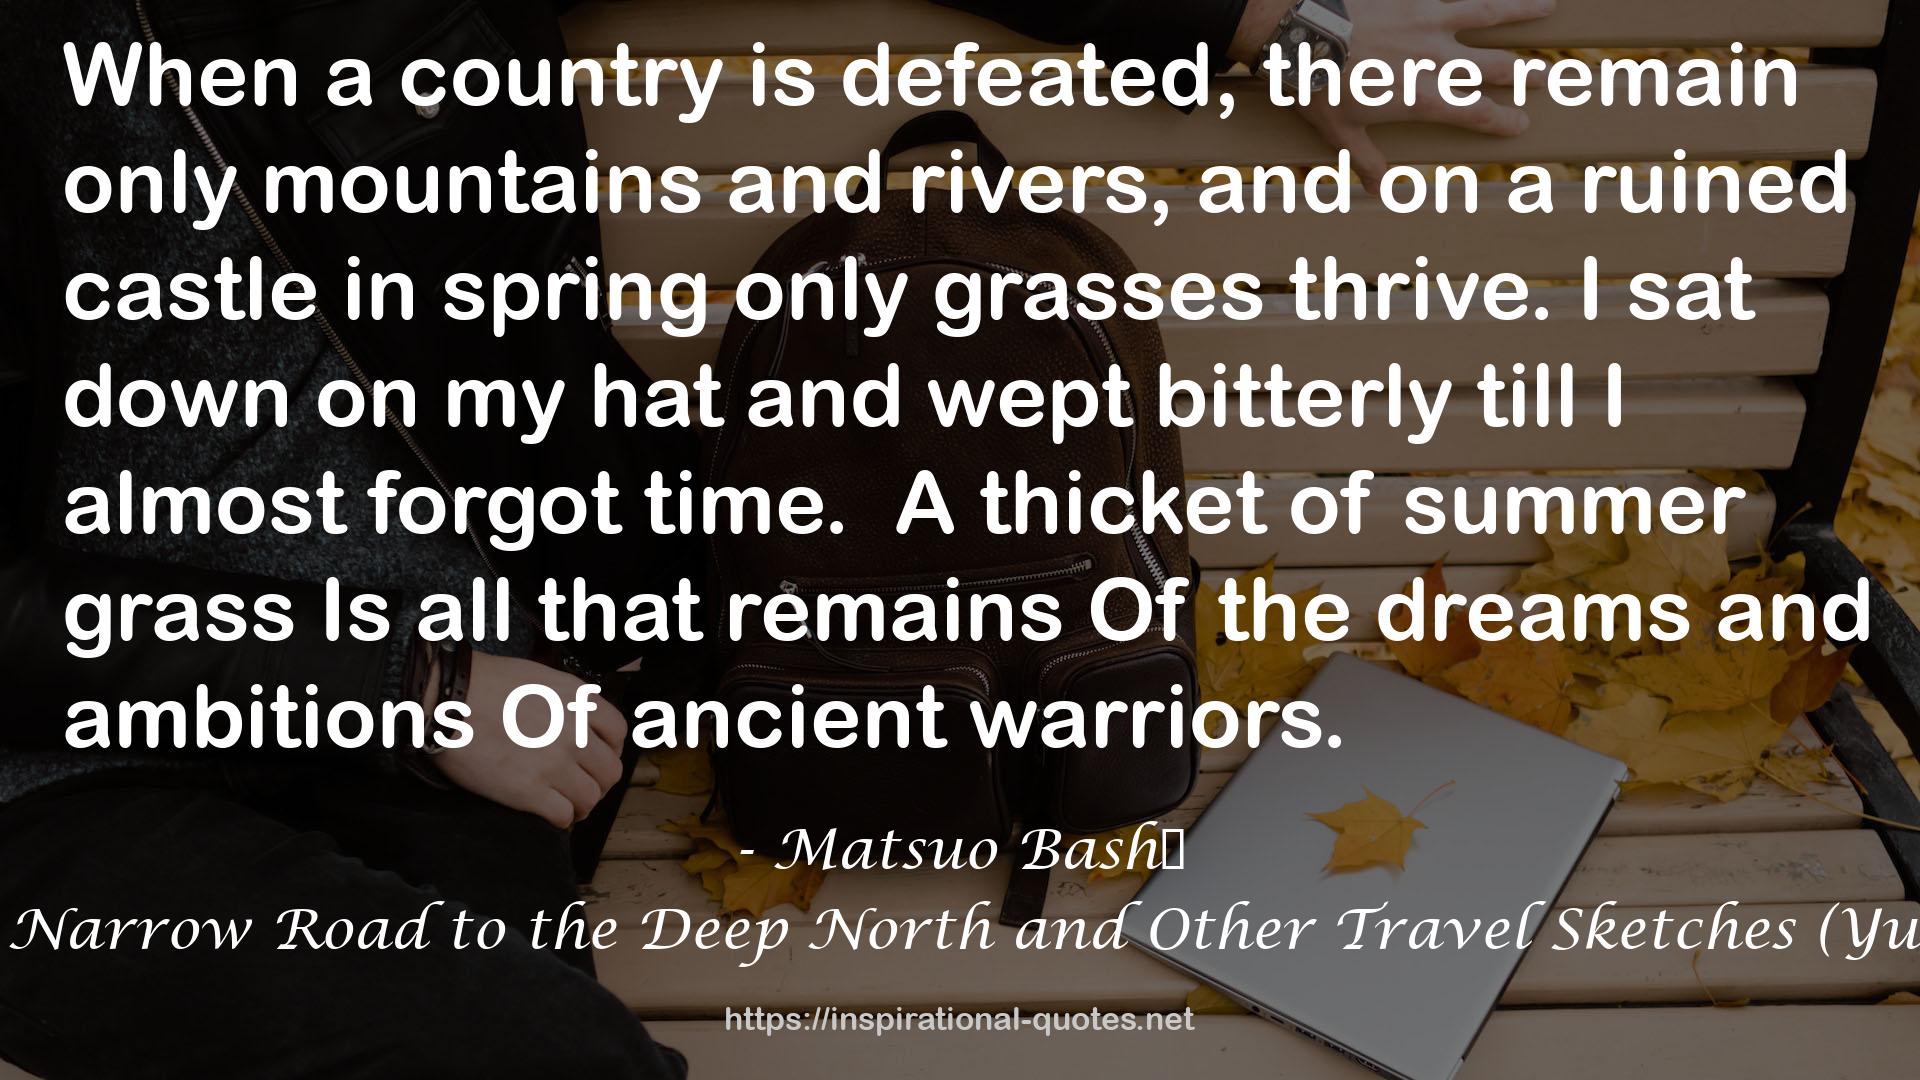 The Narrow Road to the Deep North and Other Travel Sketches (Yuasa) QUOTES